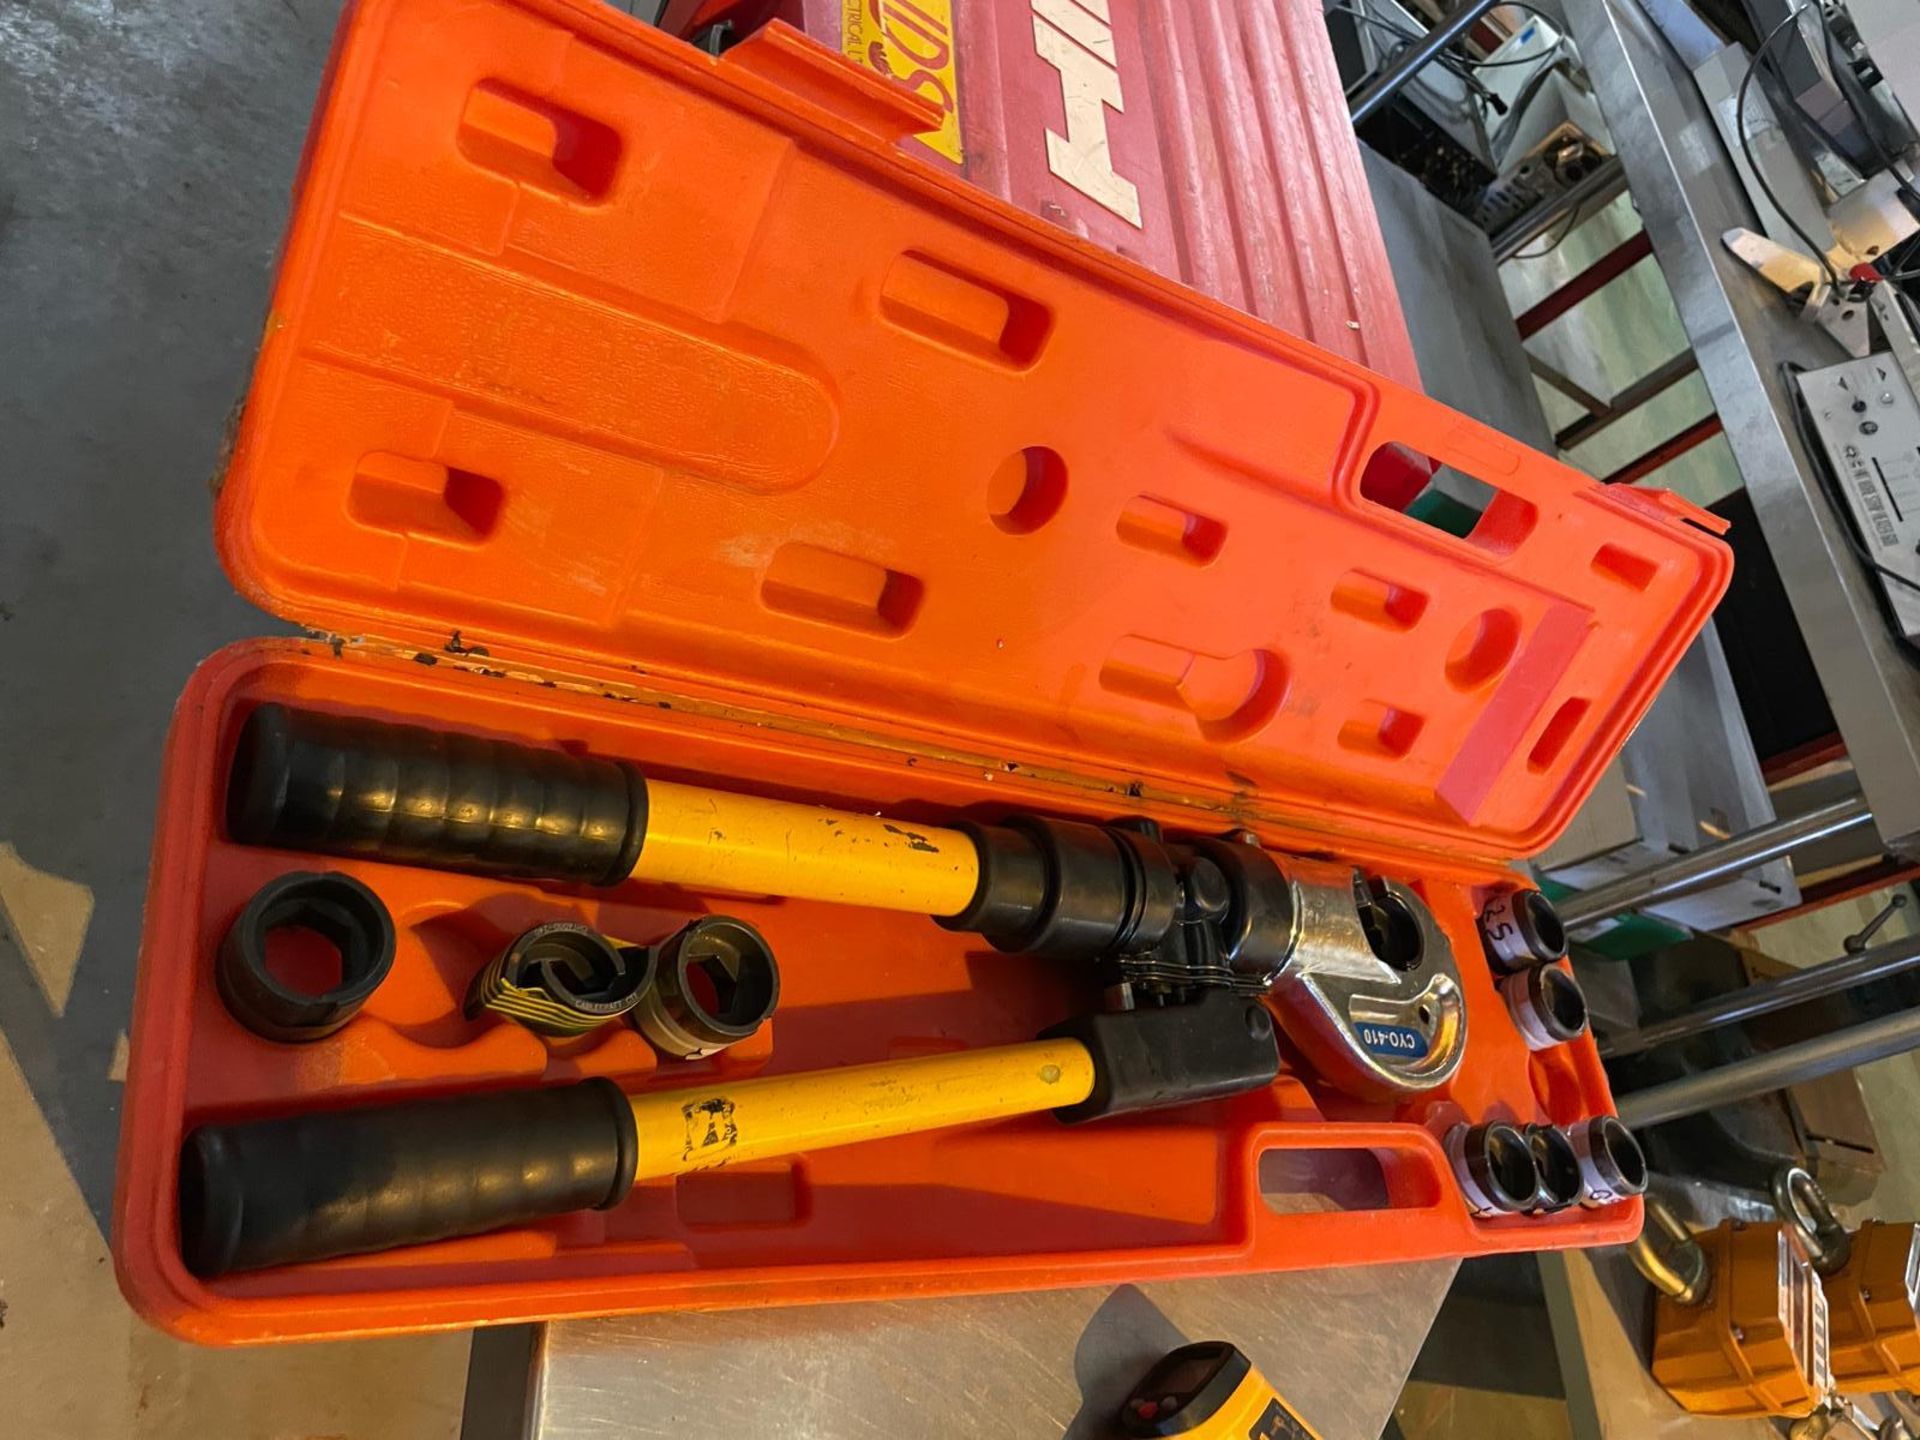 1 x Manual Hydraulic Crimping Tool - Type: CYO-410 - Includes Case and Accessories - RRP £750 - Image 2 of 11